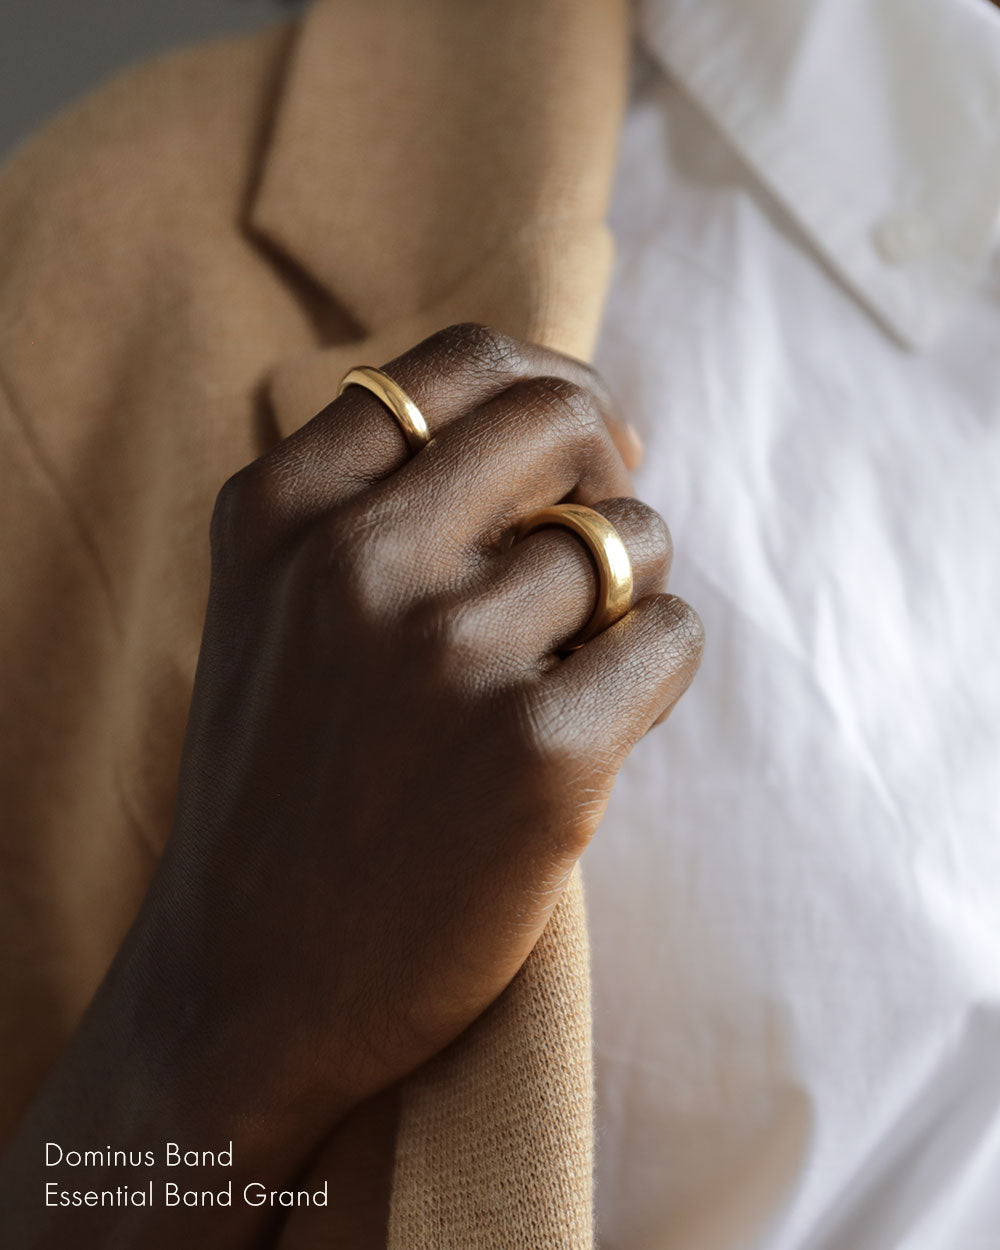 Woman wearing solid 18k yellow gold slim donut-shaped band on her index finger and large heavy rounded square 18k yellow gold band on ring finger. Essential Grande Band and Dominus Band by George Rings.